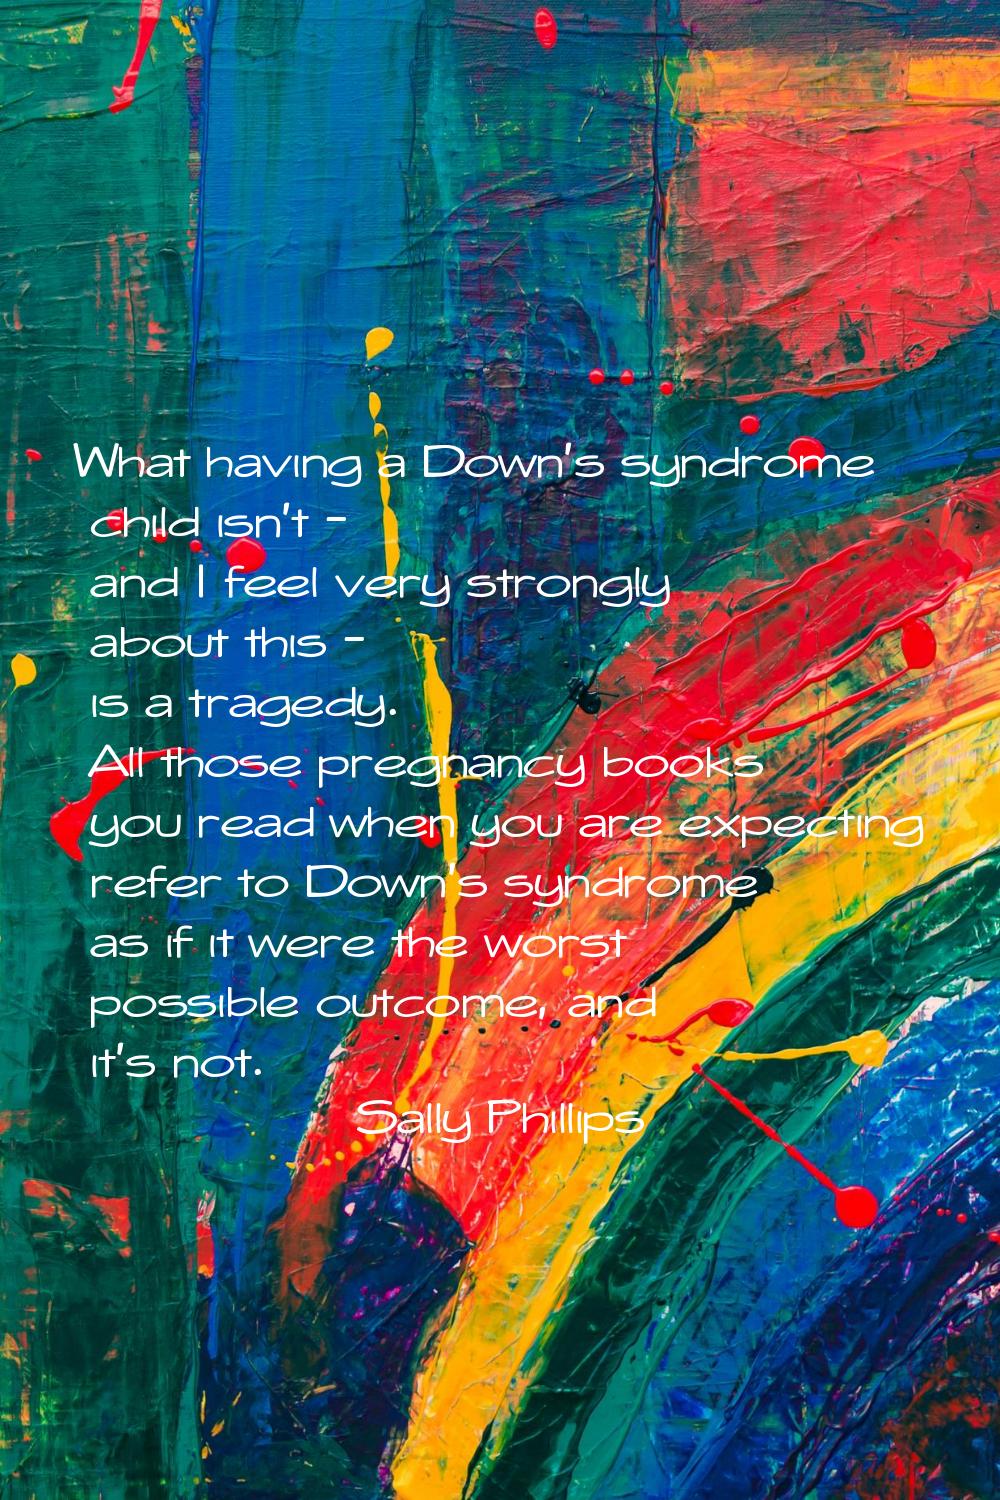 What having a Down's syndrome child isn't - and I feel very strongly about this - is a tragedy. All